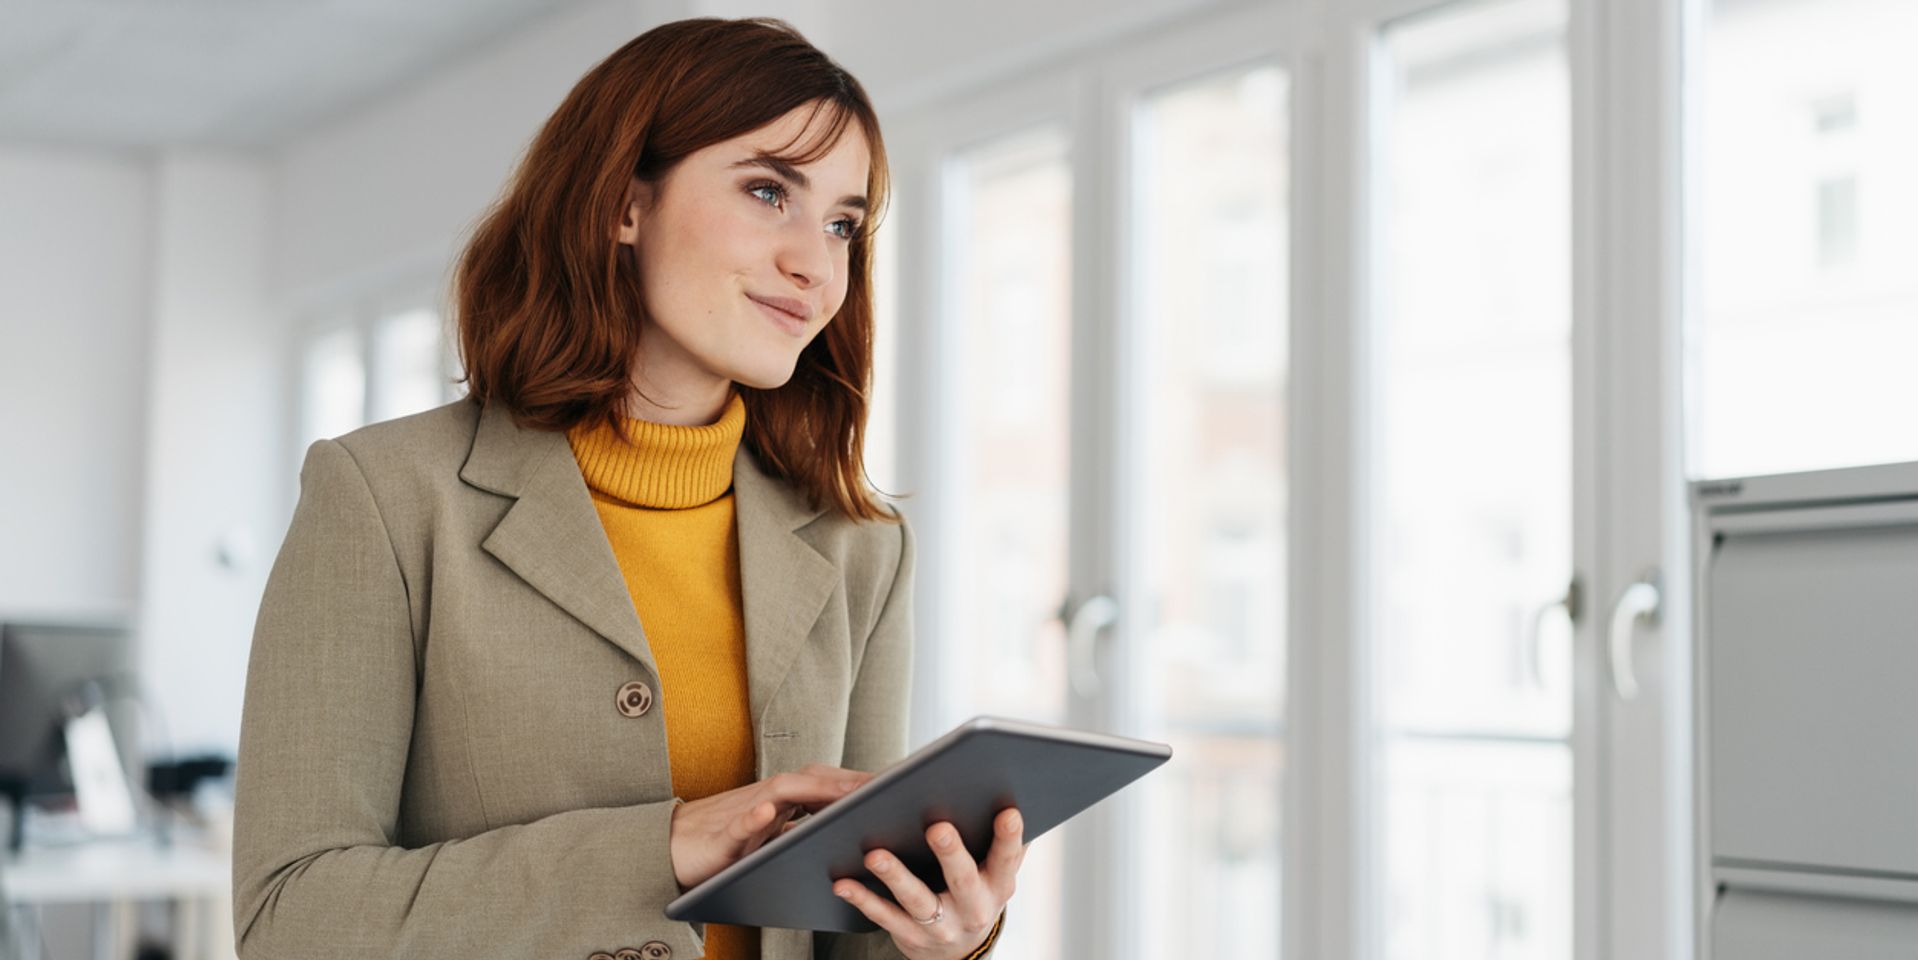 Stylish young businesswoman using a handheld tablet pc looking away with a quiet smile in a close up low angle office portrait with copy space